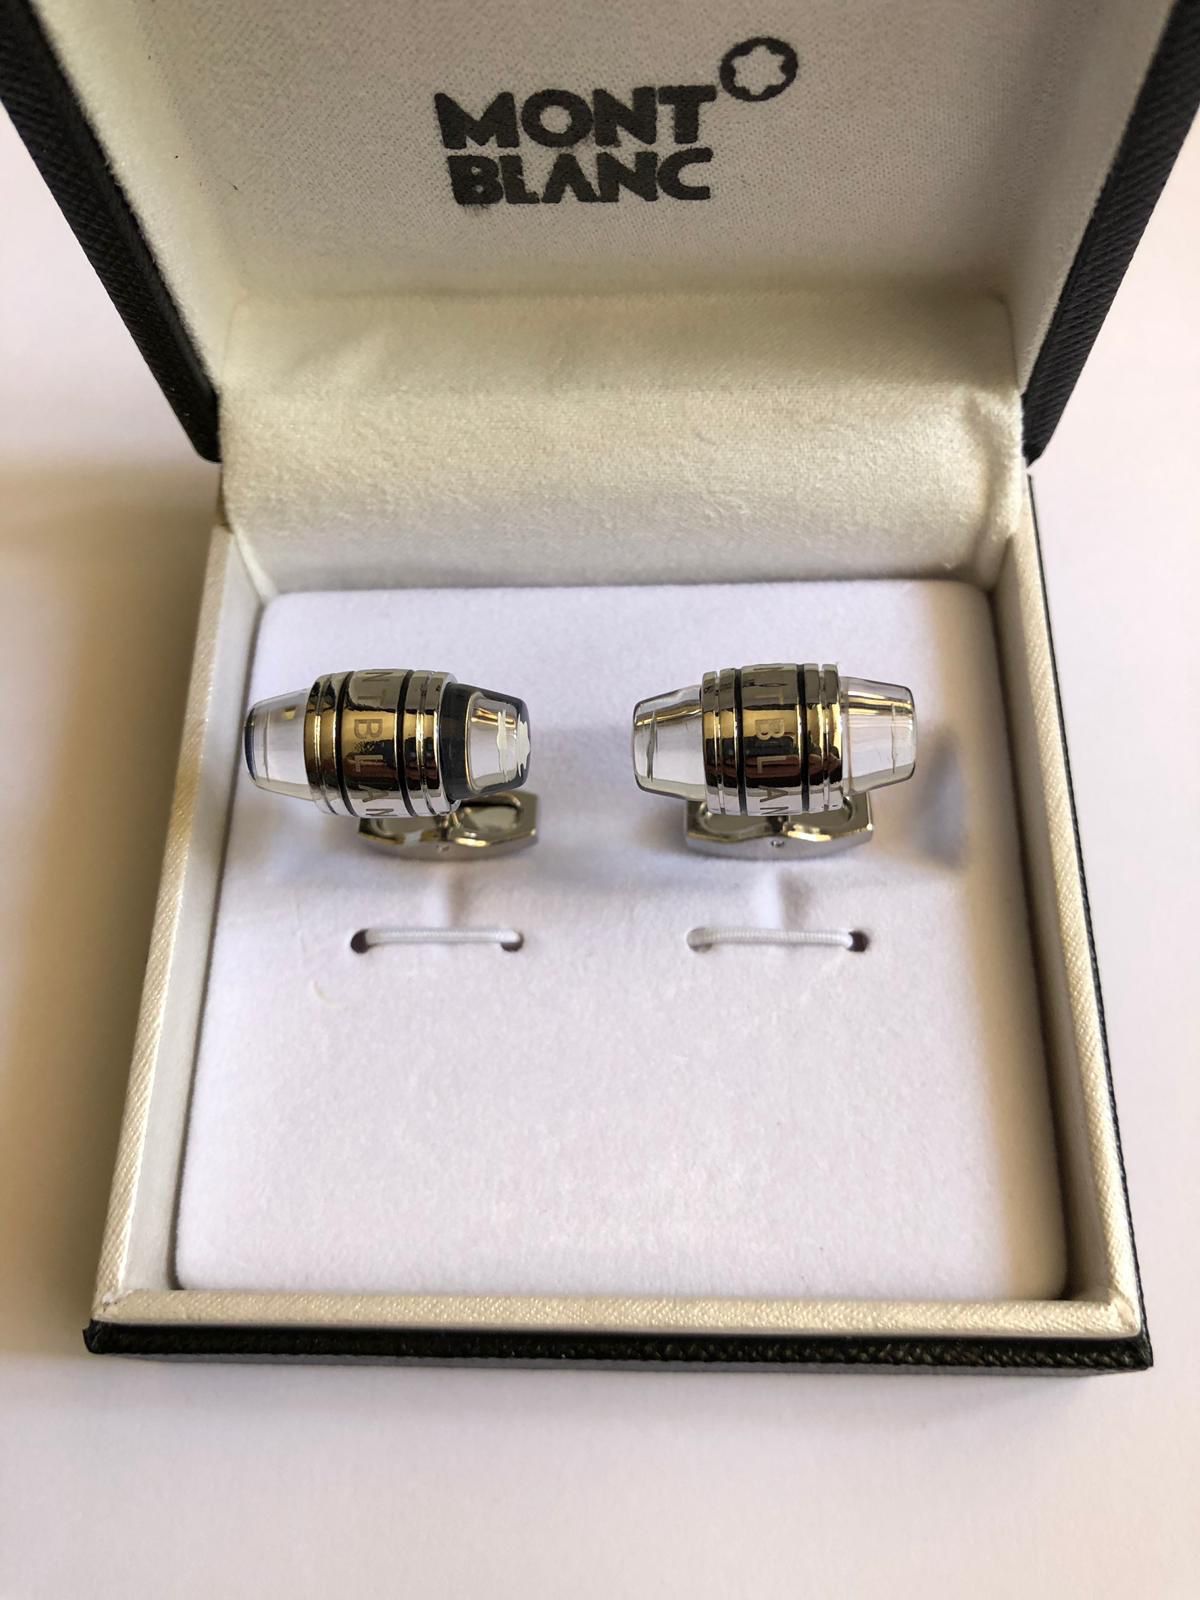 New Montblanc Silver Coated / Glass Cufflinks